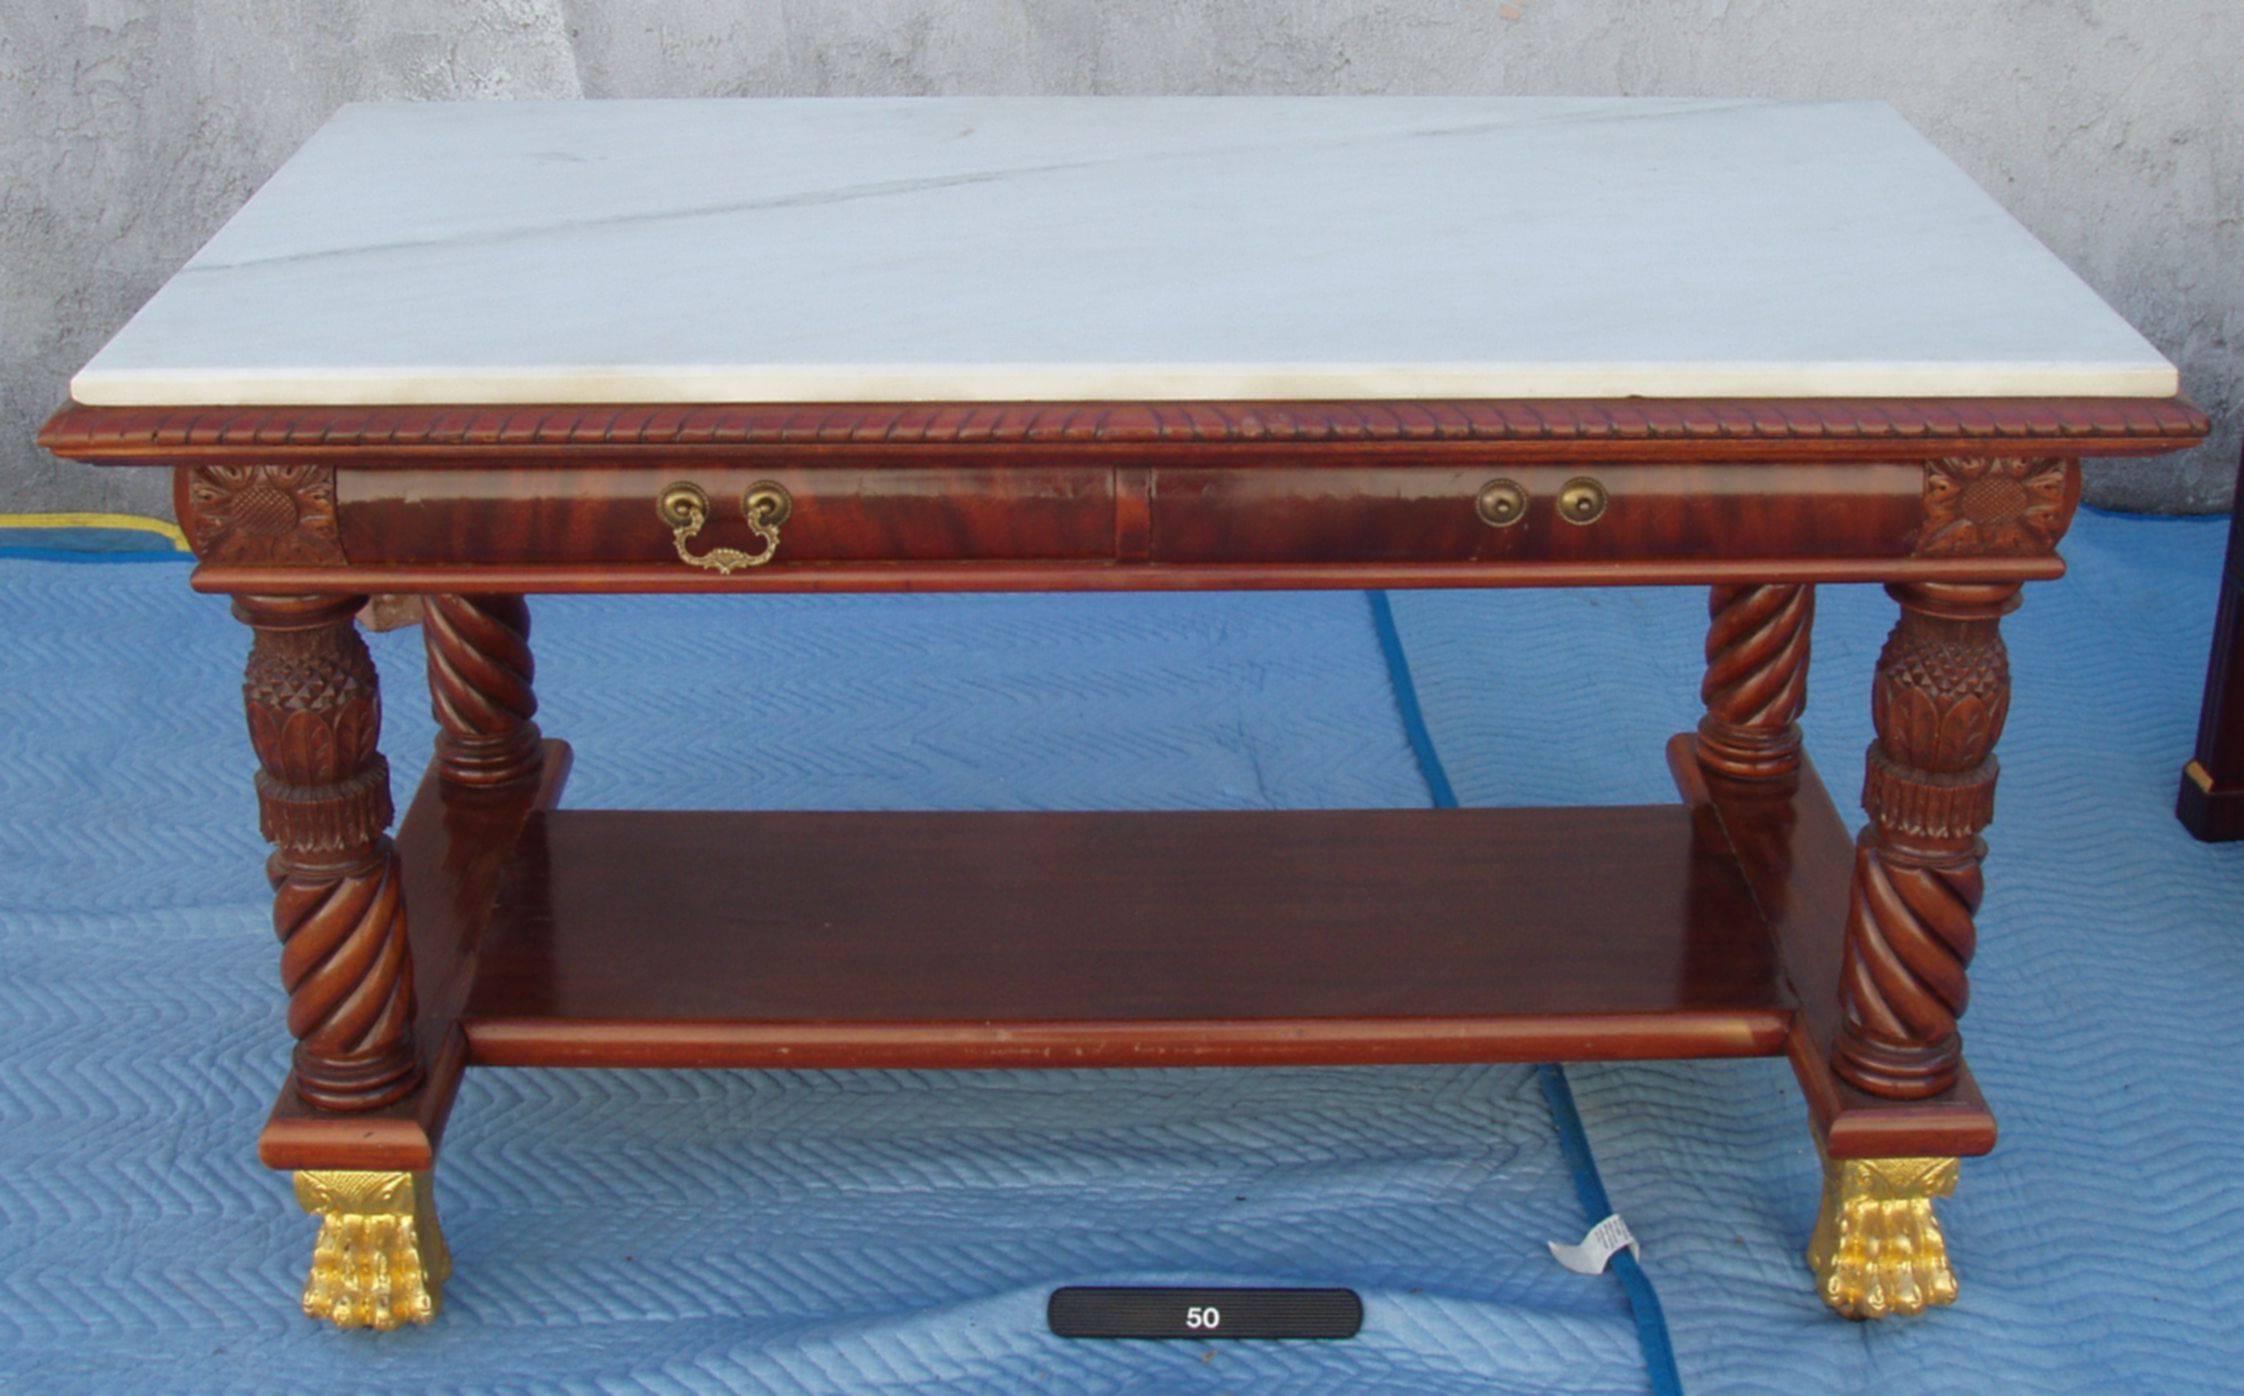 A superb 18th/ 19th century, American Federal center library table or desk/writing table-a 'Tour de Force' American Museum Piece of Quality and Style.
Full Figured Mahogany with giltwood claw feet on recessed casters, finely carved legs turnings